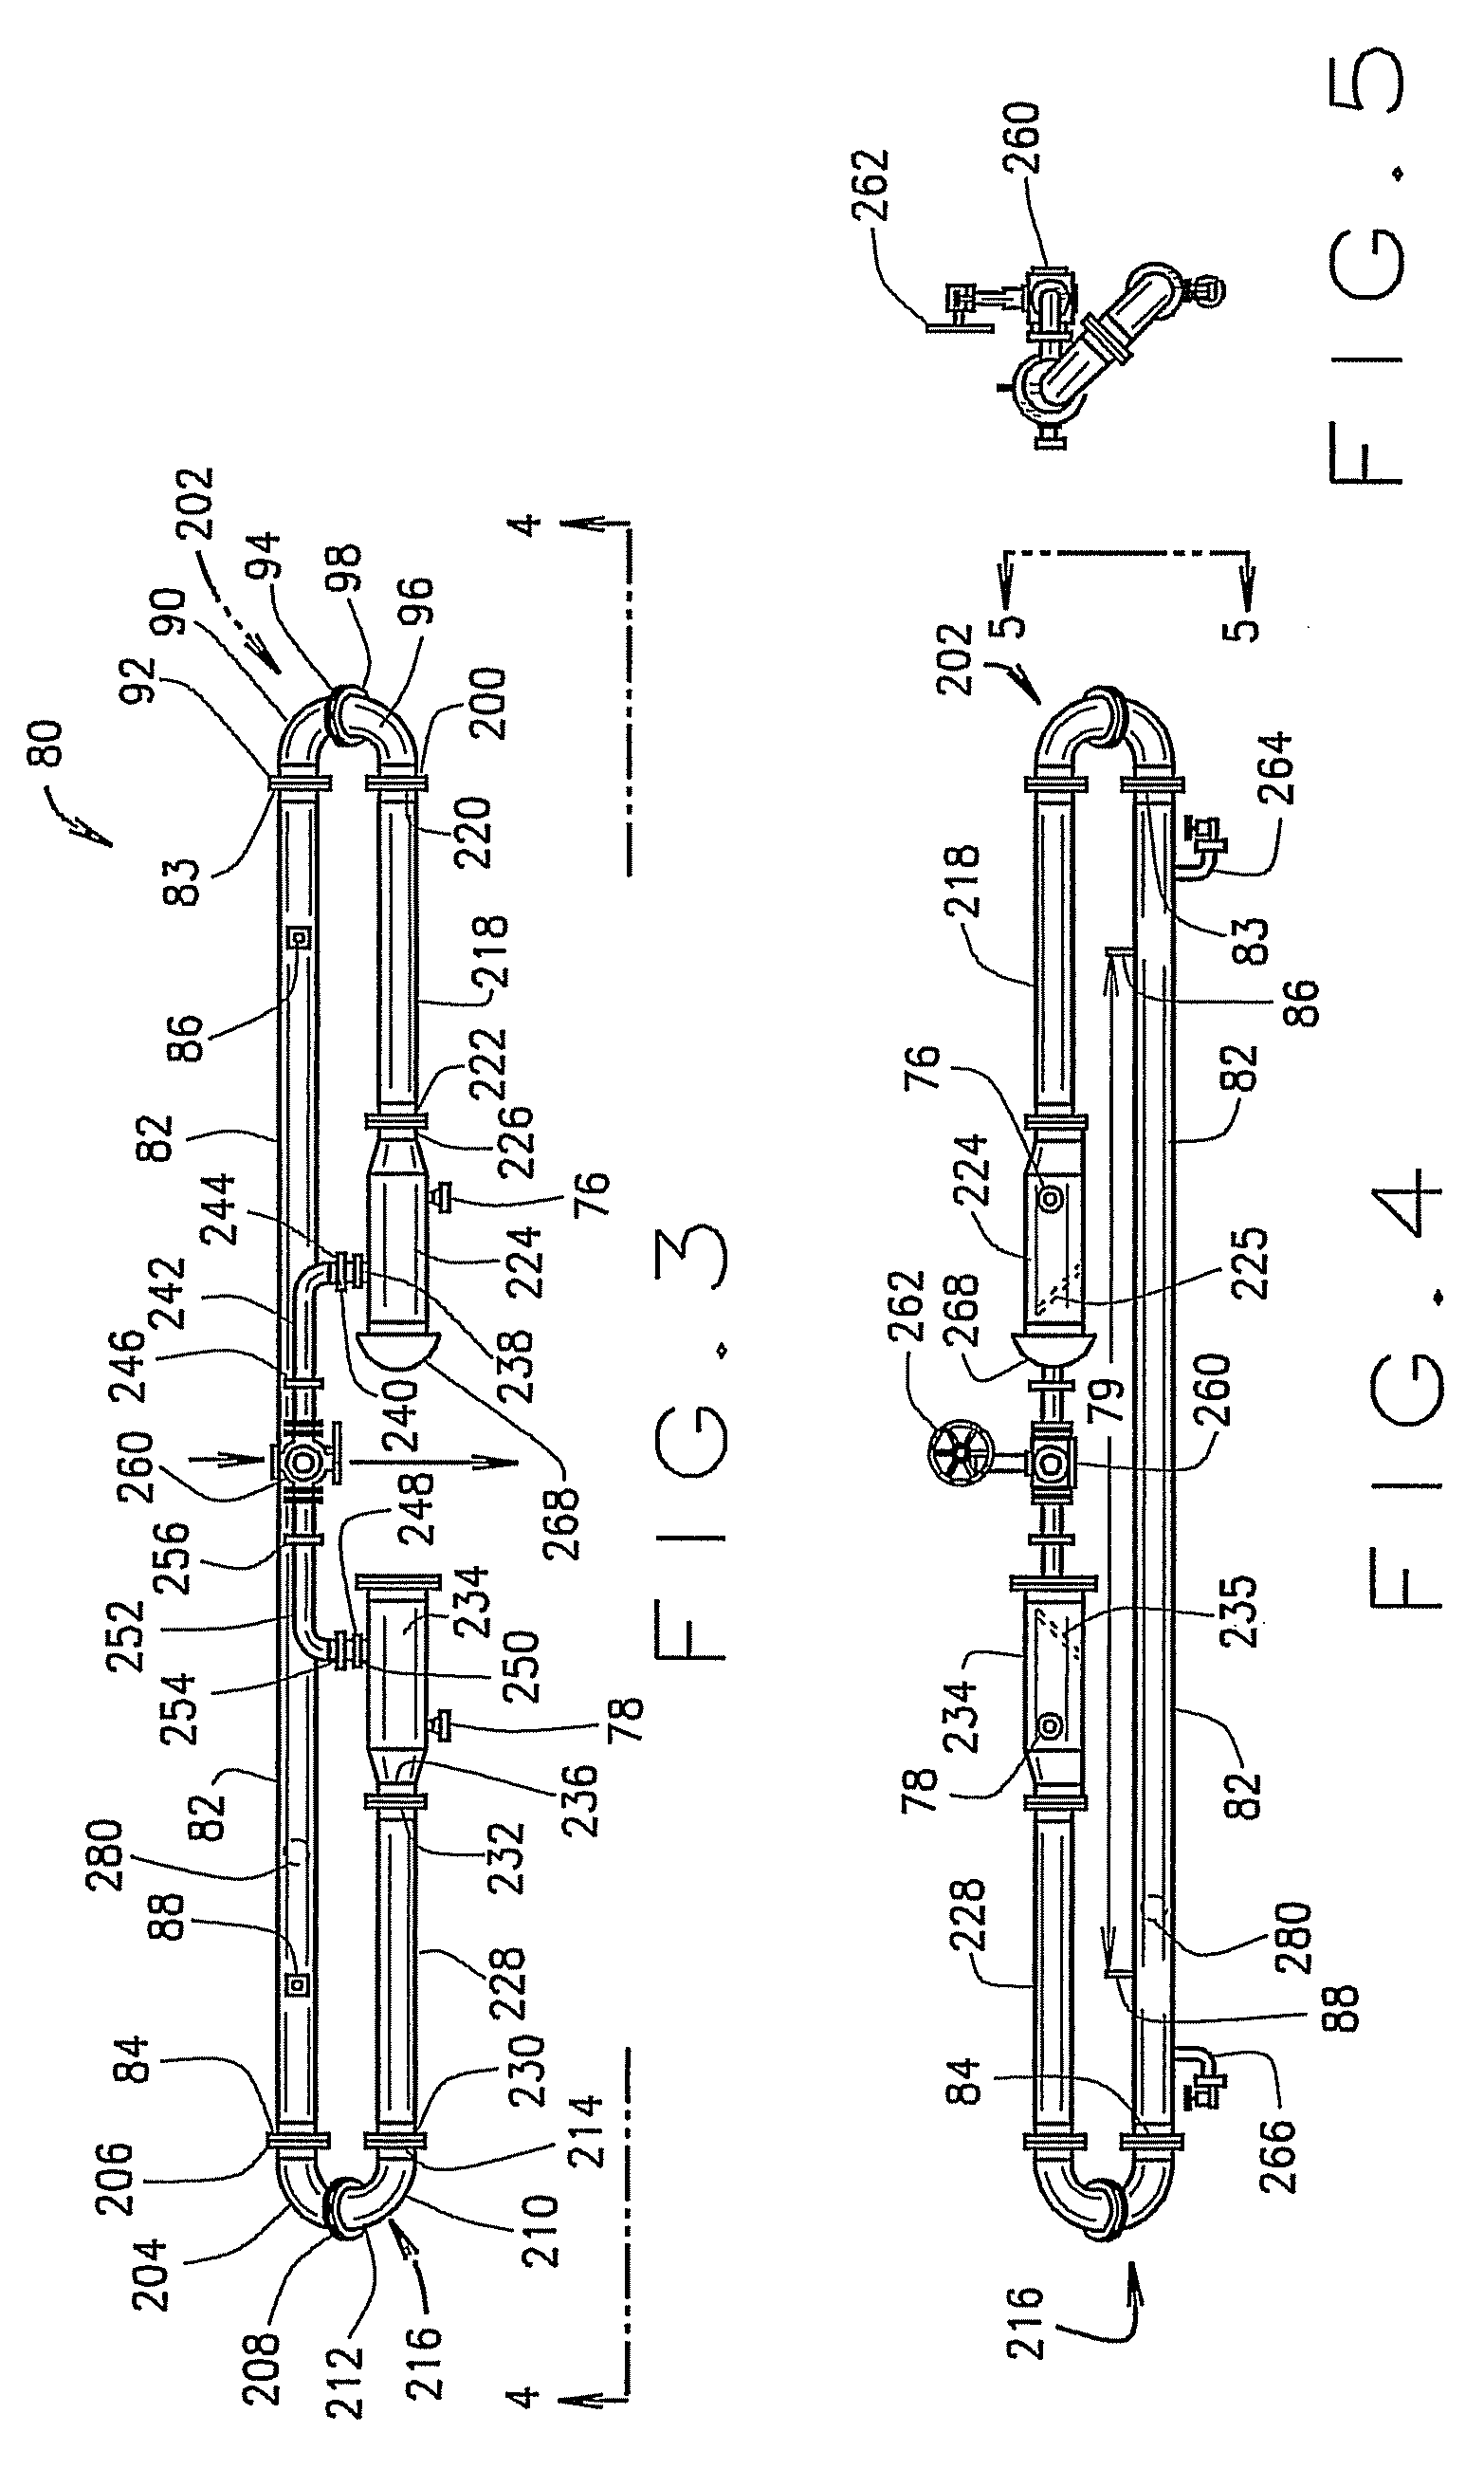 Method and apparatus for a bidirectional meter proving system